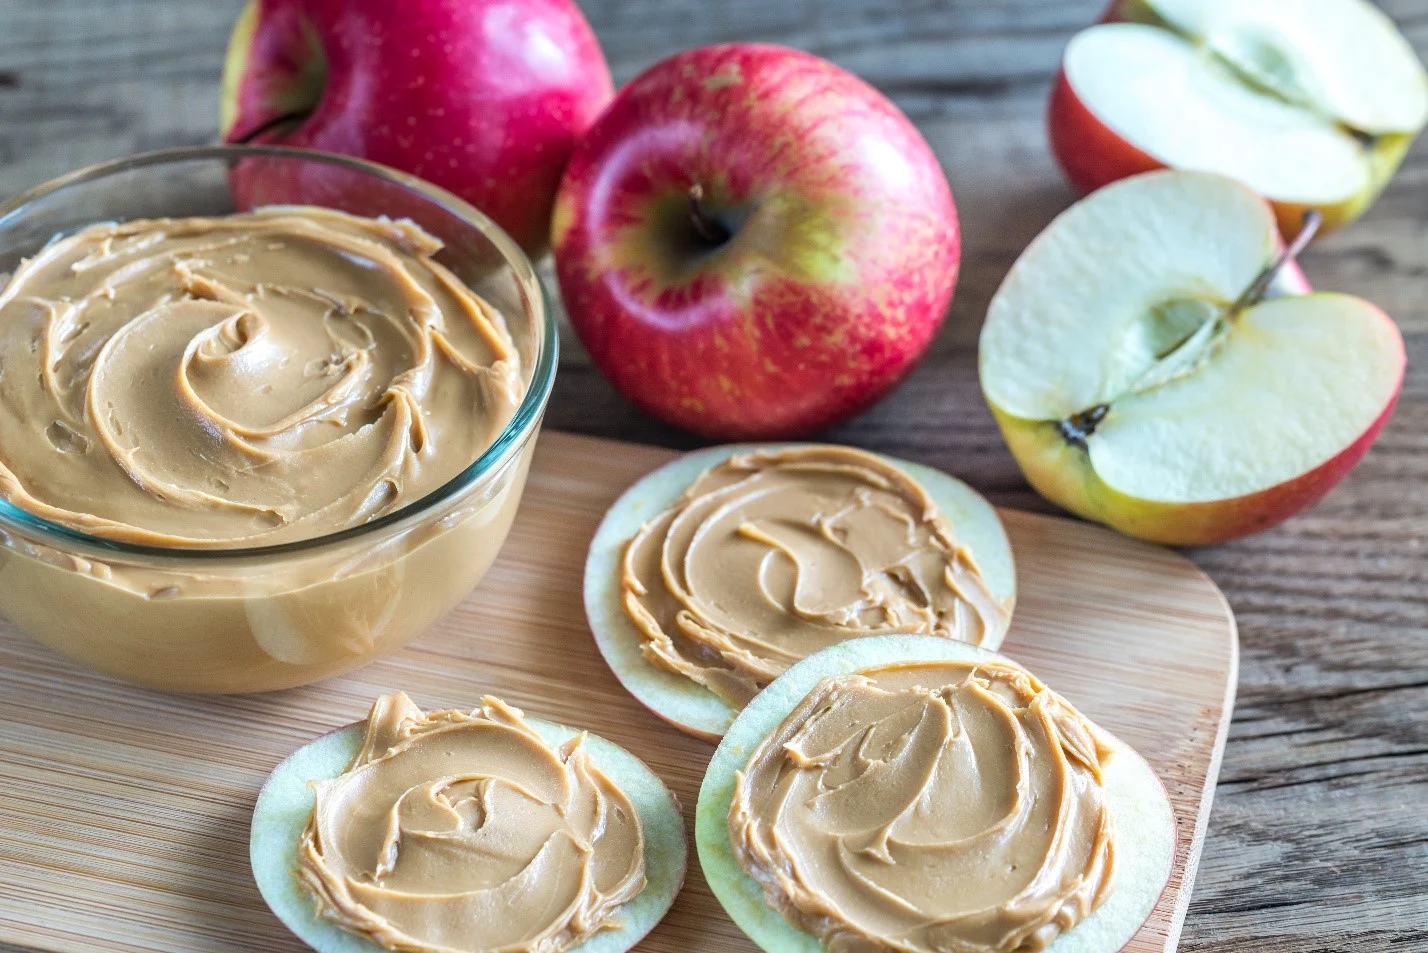 Sunflower Seed Butter and Apple Slices